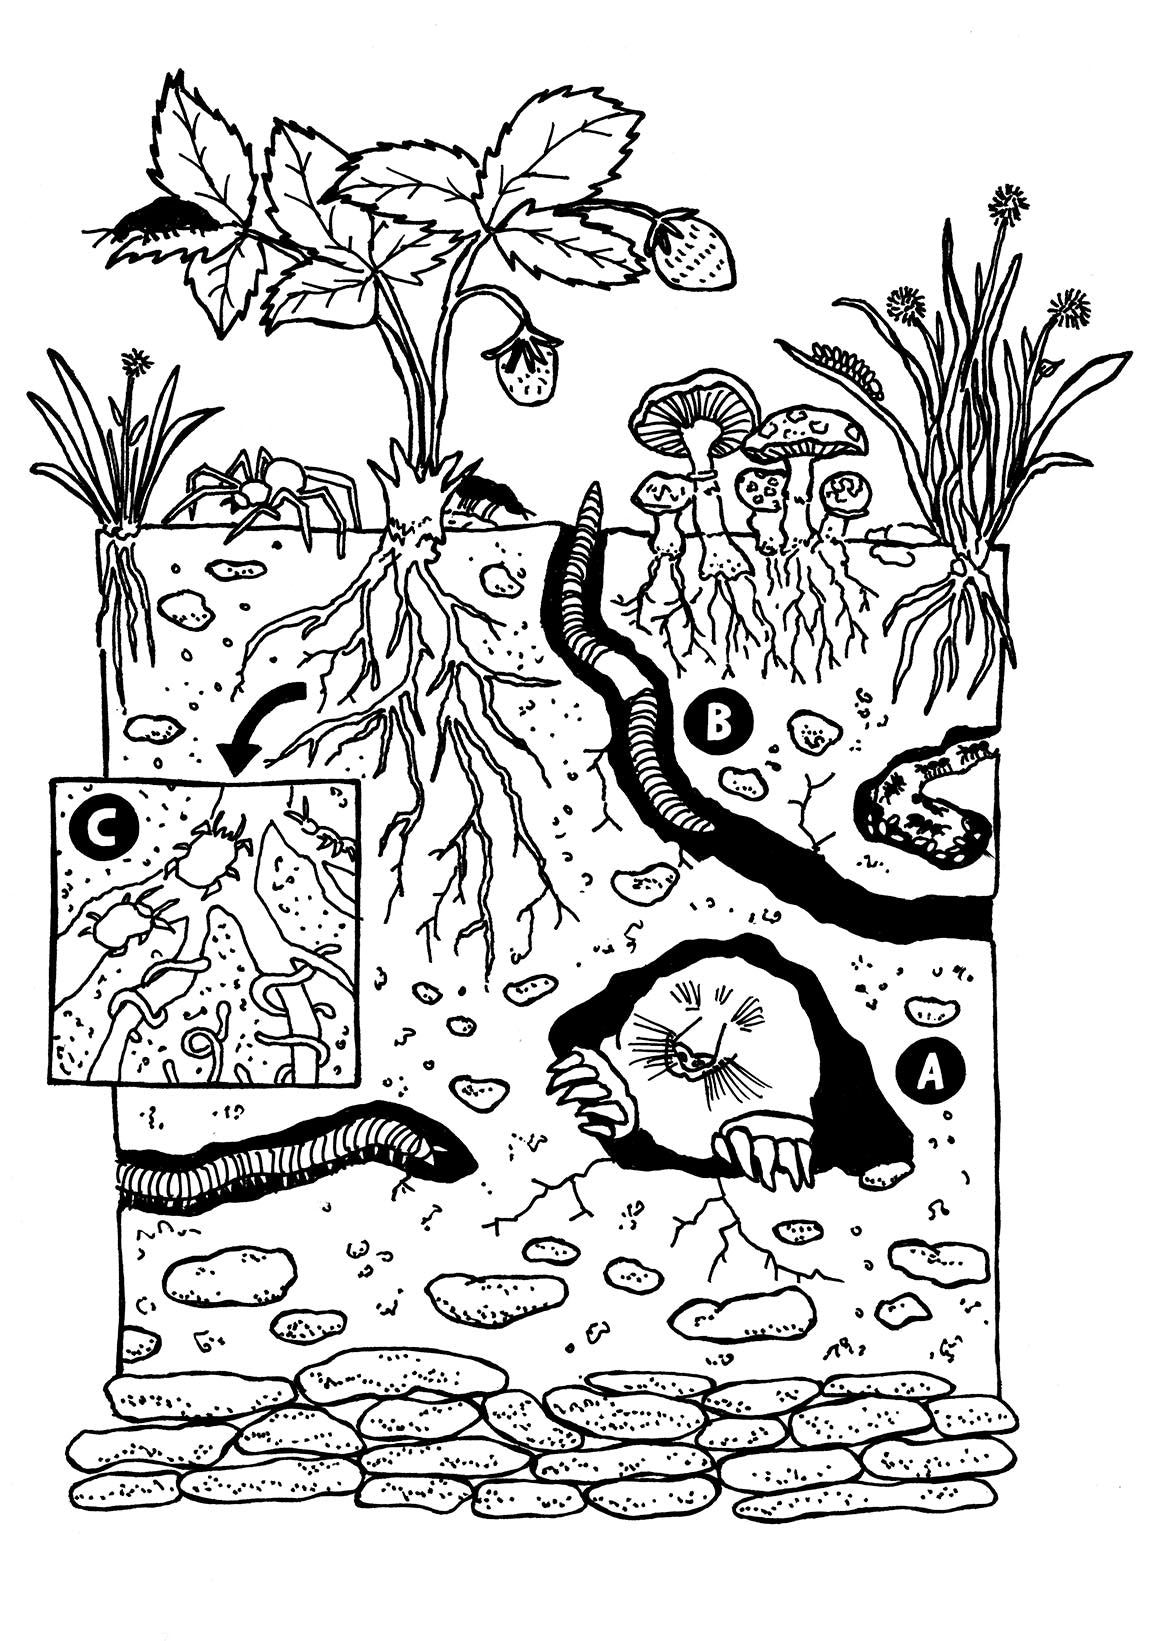 Black and white illustration of a cross section of the ground featuring healthy earth environment with plants rooting into soil and earthy organisms like moles, worms, insects, mushrooms.